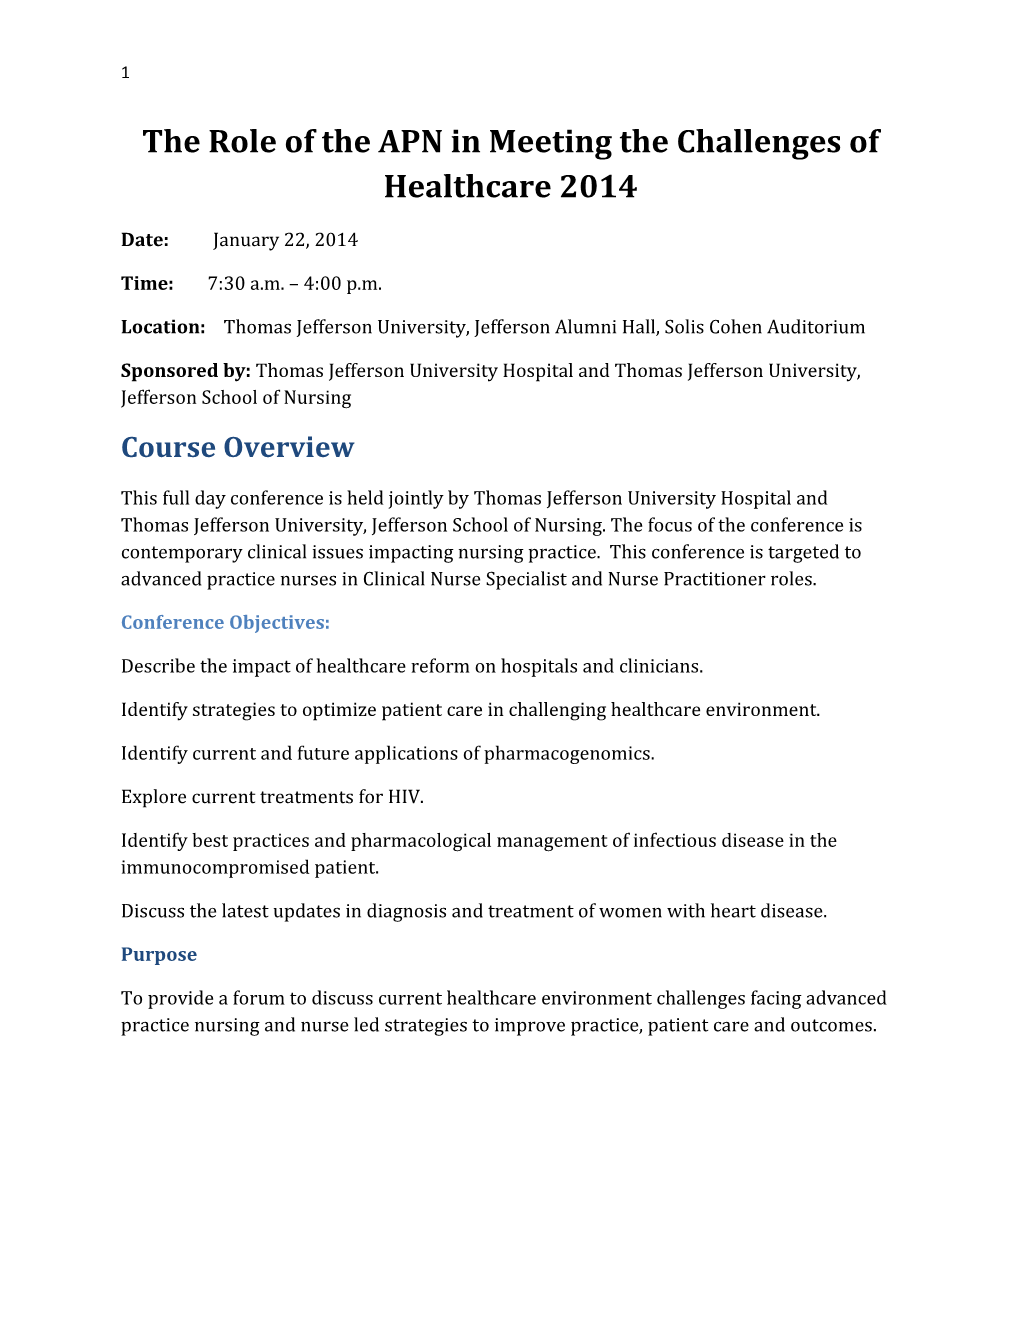 The Role of Theapn in Meeting the Challenges of Healthcare 2014